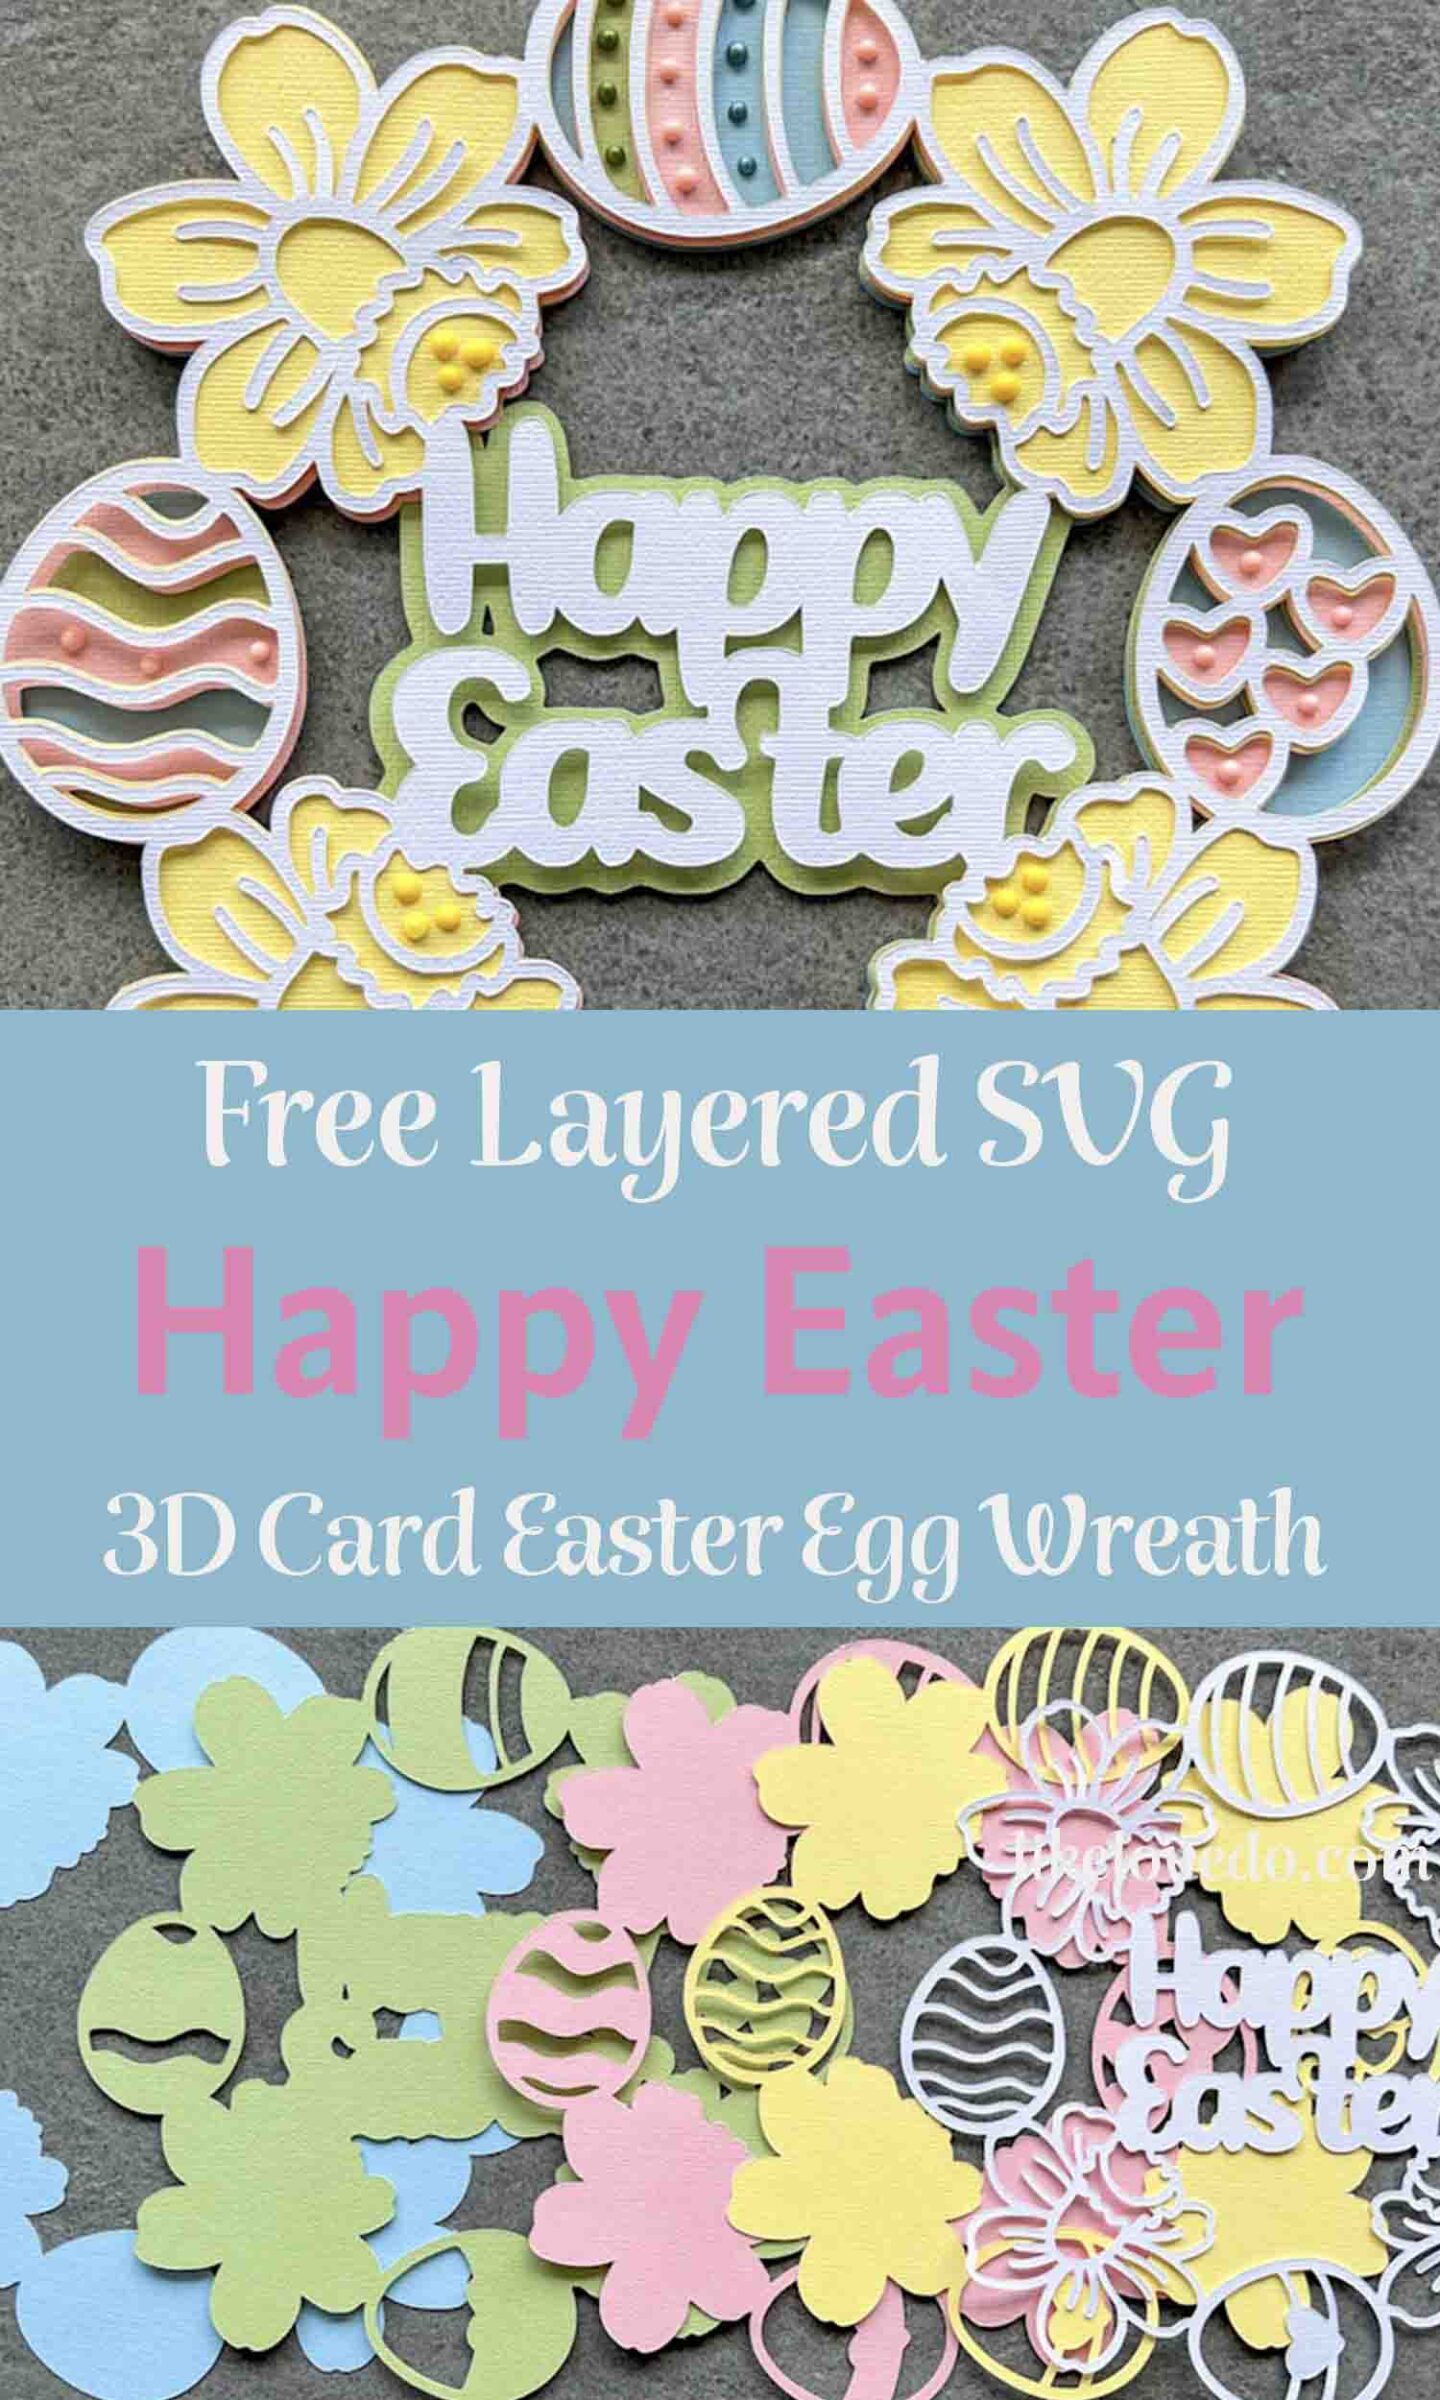 Free Layered Easter egg wreath SVG is perfect for Easter crafts. This free Easter SVG cut file Pin image